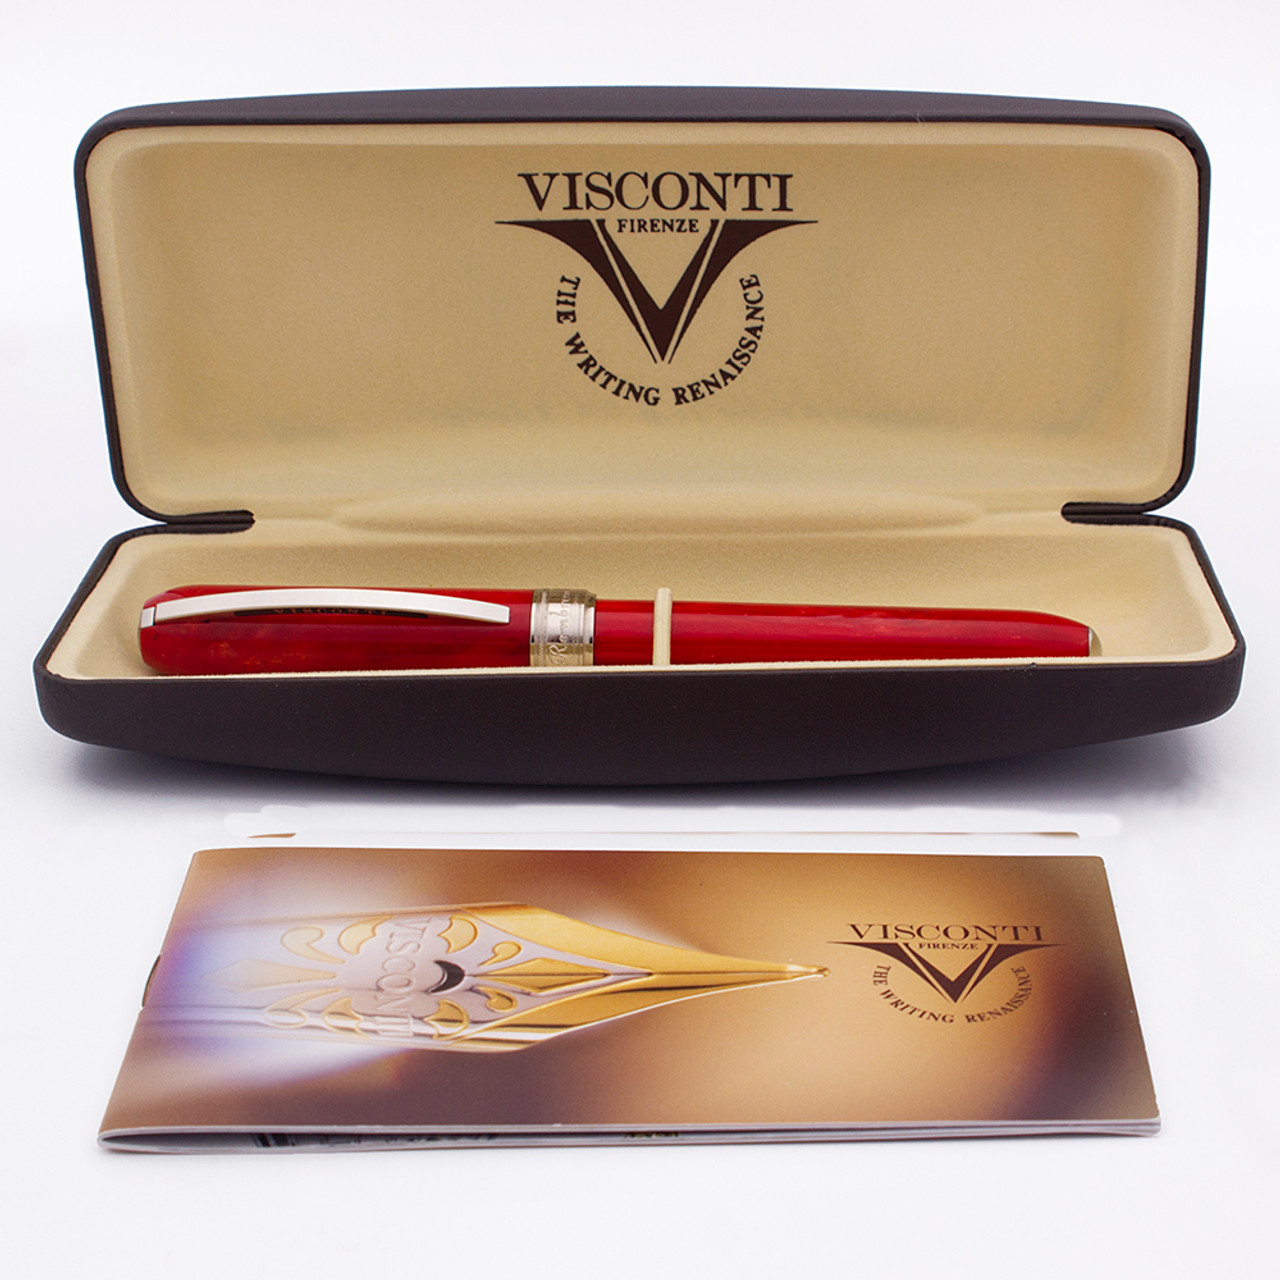 Visconti Rembrandt Eco Rollerball Pen (2010) - Red Variegated Resin, Liquid Ink System (Near Mint in Box, Works Well)